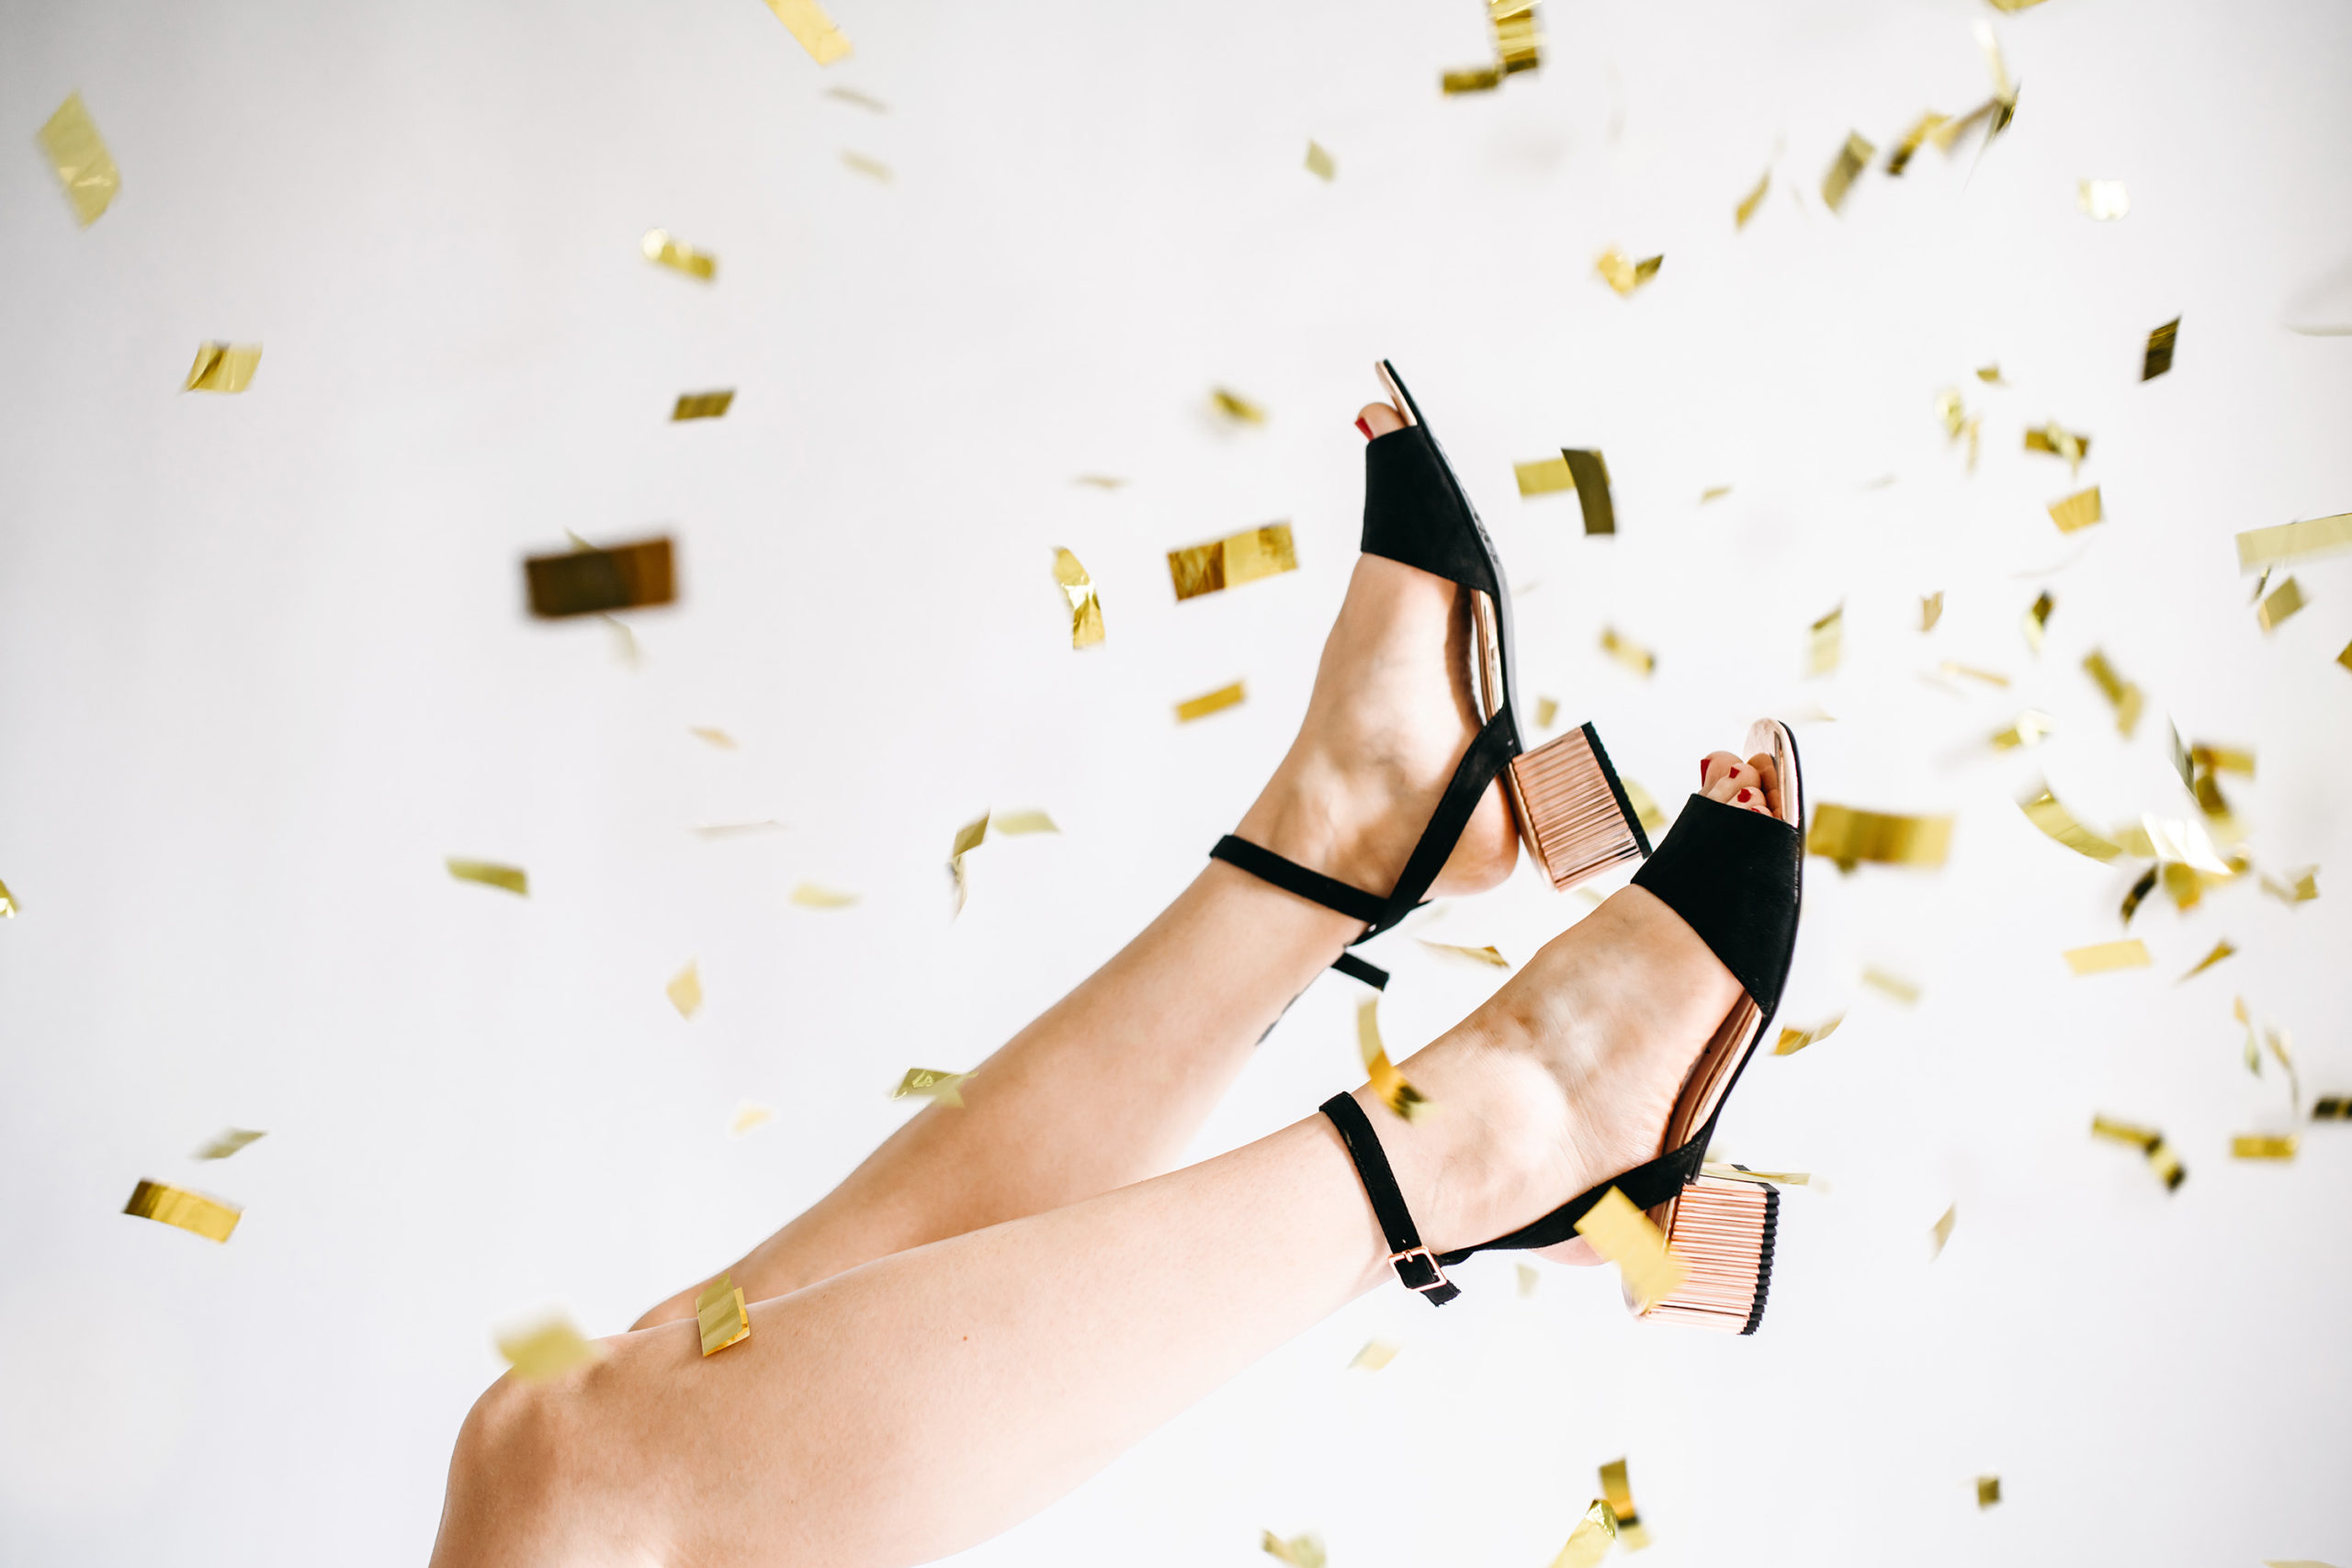 Black heels in the air with gold confetti